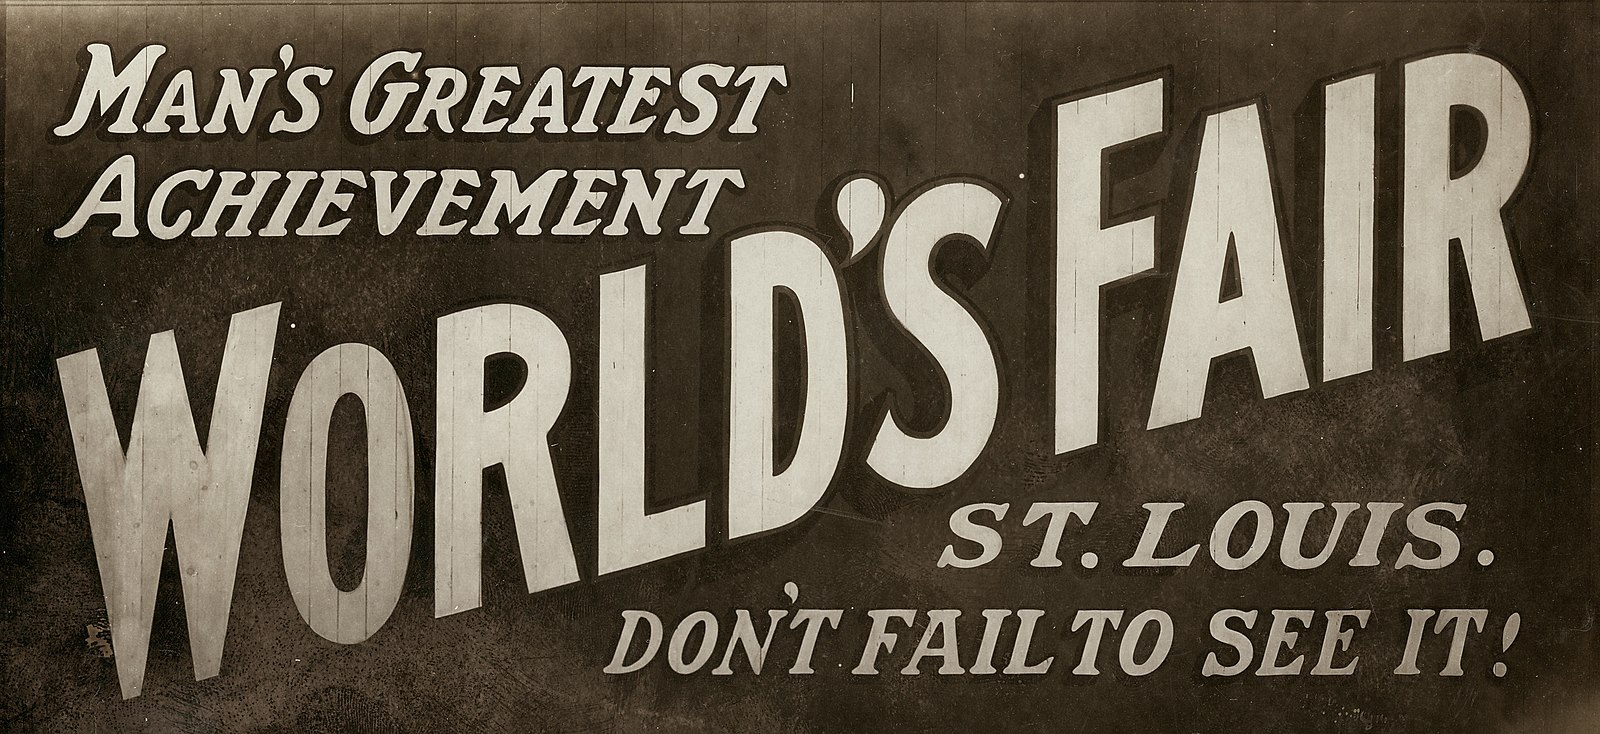 "Man's Greatest Achievement--Worlds Fair--St. Louis--Don't Fail to See It." Billboard at State and Washington Streets in Minneapolis, Minnesota advertising the 1904 World's Fair in St. Louis.